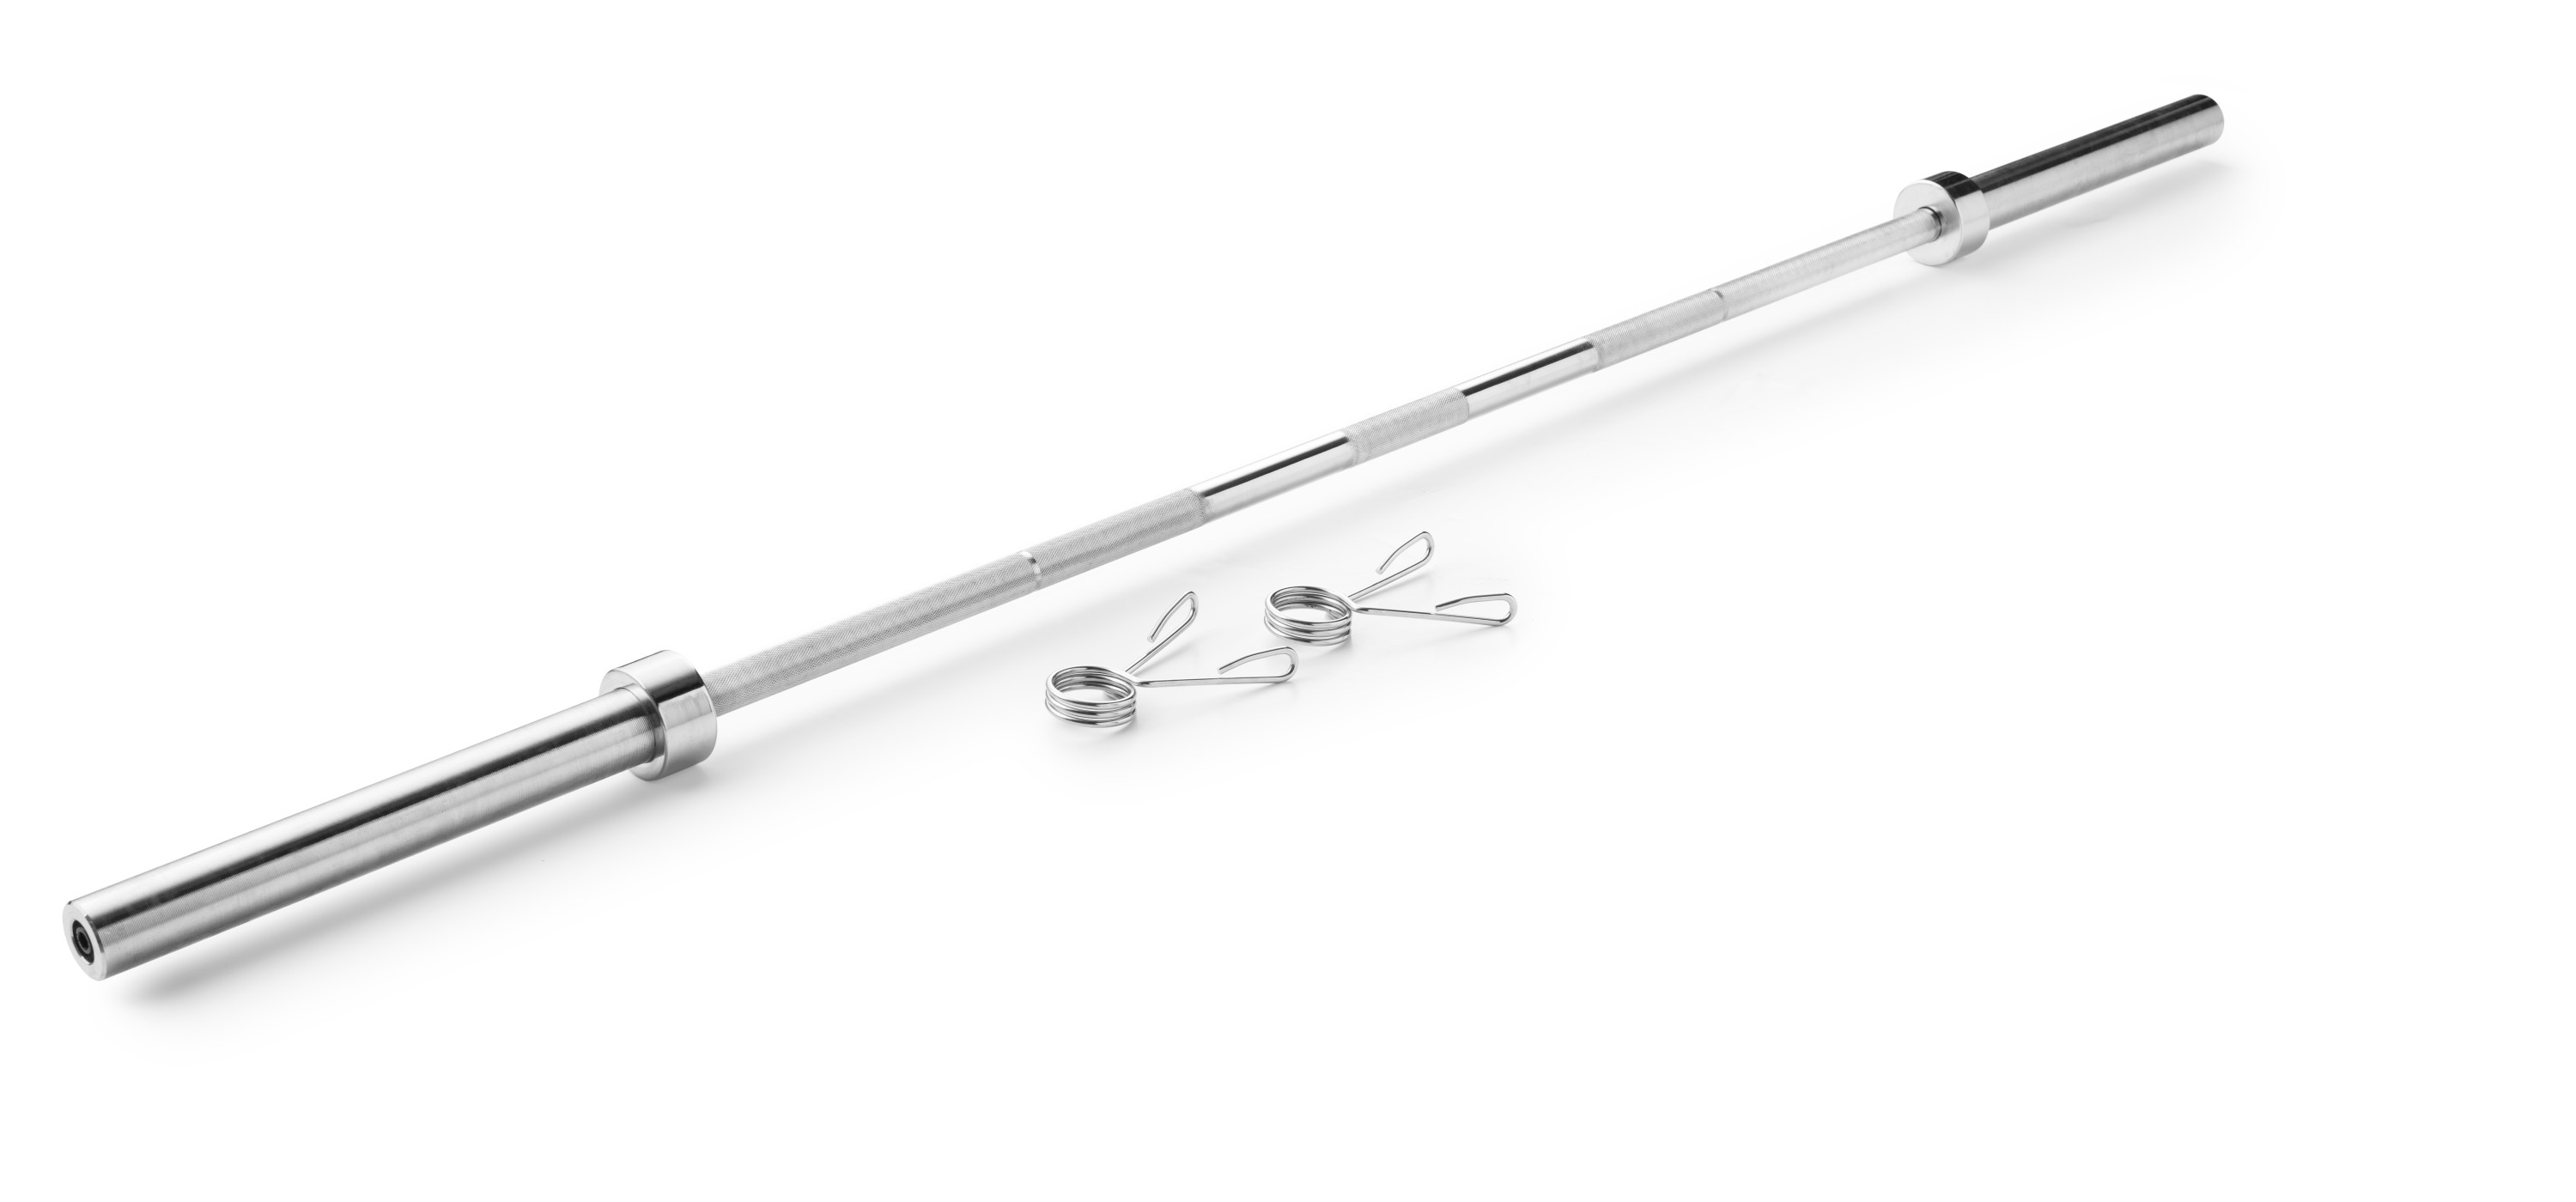 Weider 7 ft. Olympic-Sized Chrome Barbell with Partially Knurled Grip, 310 lb. Weight Capacity - image 3 of 5